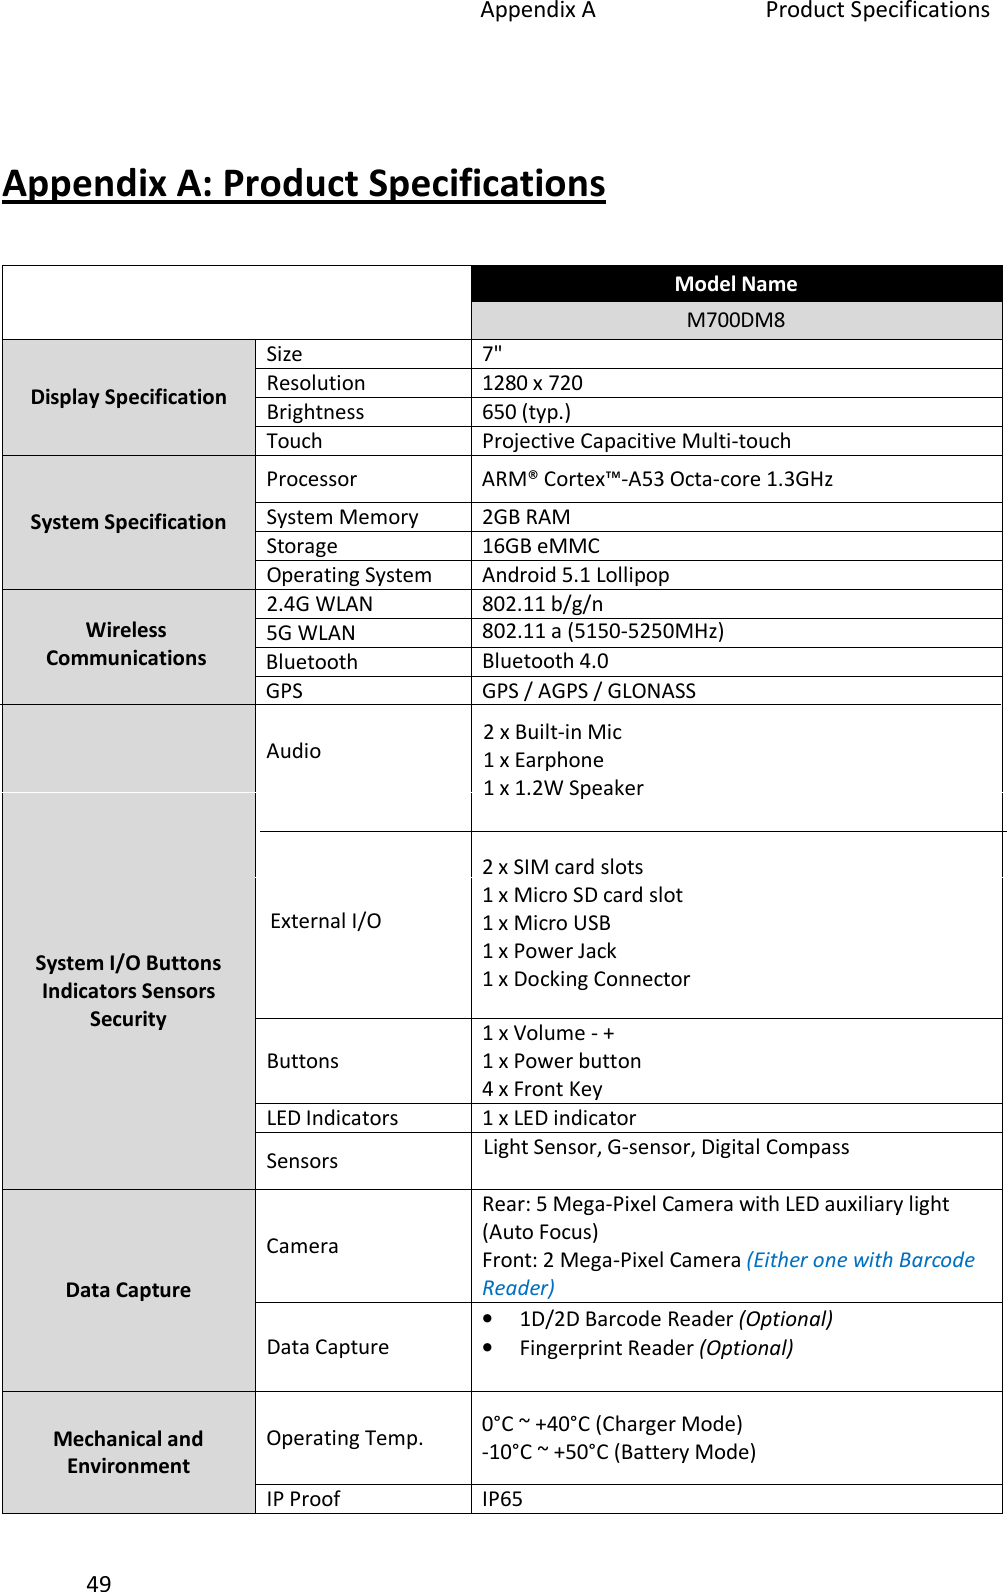 Appendix A  Product Specifications 49 Appendix A: Product Specifications Model Name M700DM8 Display Specification Size 7&quot; Resolution 1280 x 720 Brightness 650 (typ.) Touch Projective Capacitive Multi-touch System Specification Processor  ARM® Cortex™-A53 Octa-core 1.3GHz System Memory 2GB RAM Storage 16GB eMMC Operating System Android 5.1 Lollipop Wireless Communications 2.4G WLAN  802.11 b/g/n Bluetooth 4.0 GPS / AGPS / GLONASS System I/O Buttons Indicators Sensors Security Audio 2 x Built-in Mic 1 x Earphone 1 x 1.2W Speaker External I/O 2 x SIM card slots 1 x Micro SD card slot 1 x Micro USB 1 x Power Jack 1 x Docking Connector Buttons 1 x Volume - + 1 x Power button 4 x Front Key LED Indicators 1 x LED indicator Sensors Light Sensor, G-sensor, Digital Compass Data Capture Camera Rear: 5 Mega-Pixel Camera with LED auxiliary light (Auto Focus) Front: 2 Mega-Pixel Camera (Either one with BarcodeReader)Data Capture •1D/2D Barcode Reader (Optional)•Fingerprint Reader (Optional)Mechanical and Environment Operating Temp.  0°C ~ +40°C (Charger Mode) -10°C ~ +50°C (Battery Mode)IP Proof IP65 GPS Bluetooth 5G WLAN  802.11 a (5150-5250MHz)